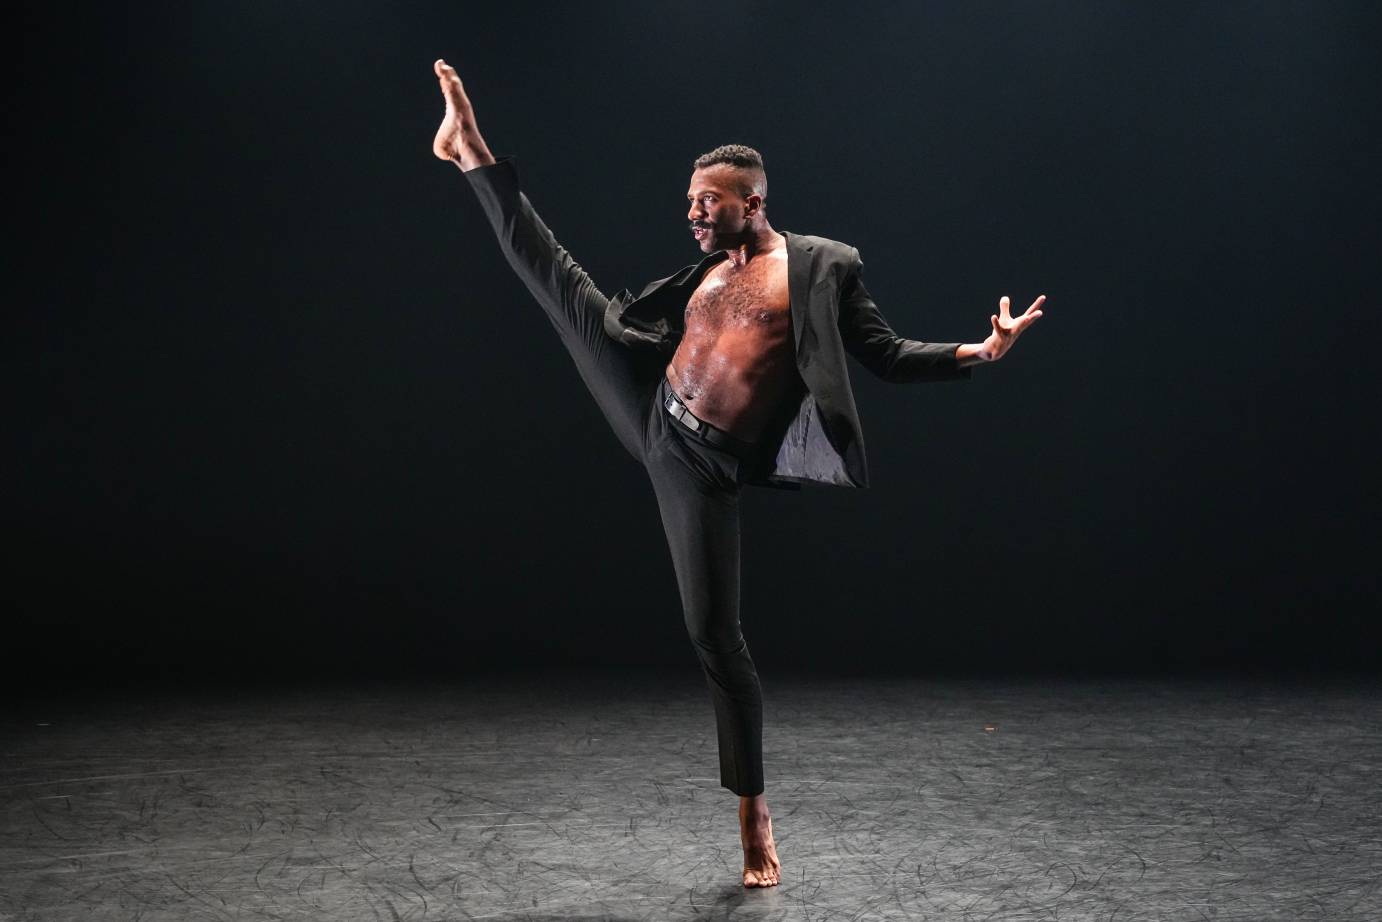 a Black man in tight black pants, and an open black jacket, his chest is bare, kicks one leg very high to his side, he has an intent concentrated look on his face. The kick is impressive.